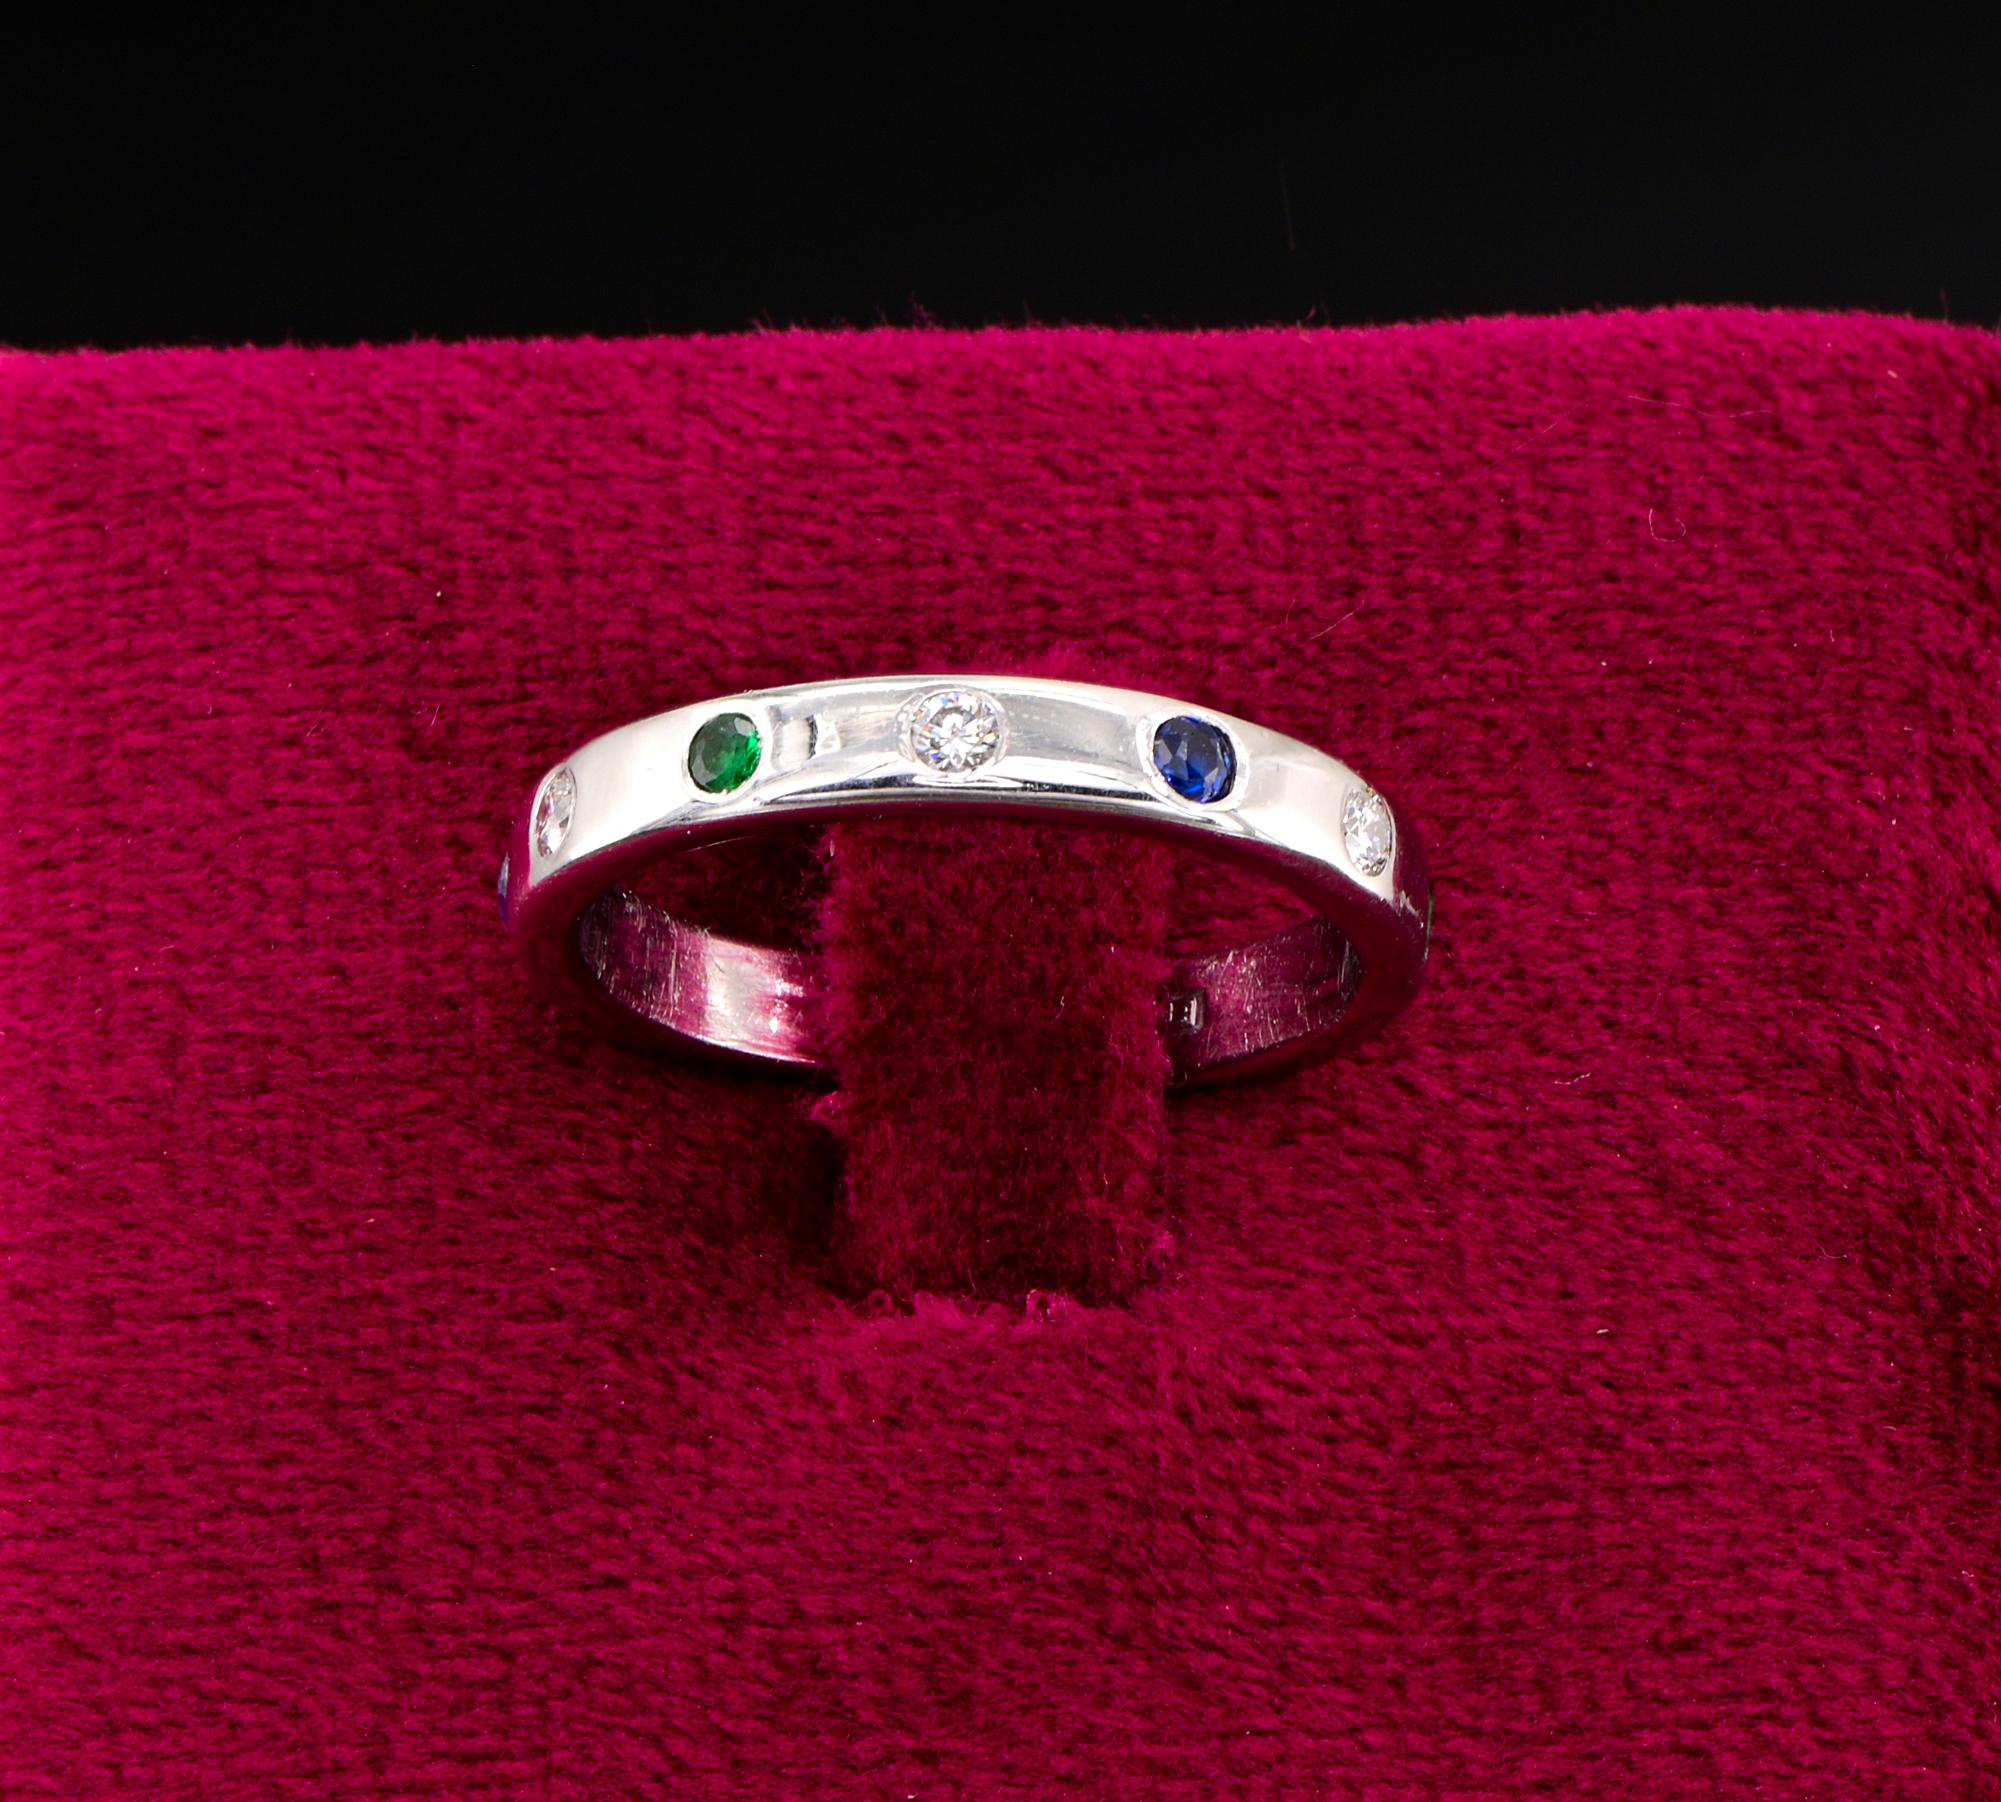 An Unique
Distinctive and pretty different Contemporary full eternity ring bearing British hallmarks
Exquisitely hand crafted of solid 18 Kt gold
Set throughout with alternating natural Emeralds, Sapphires , Diamonds for approx .50 Ct TCW
3 mm in